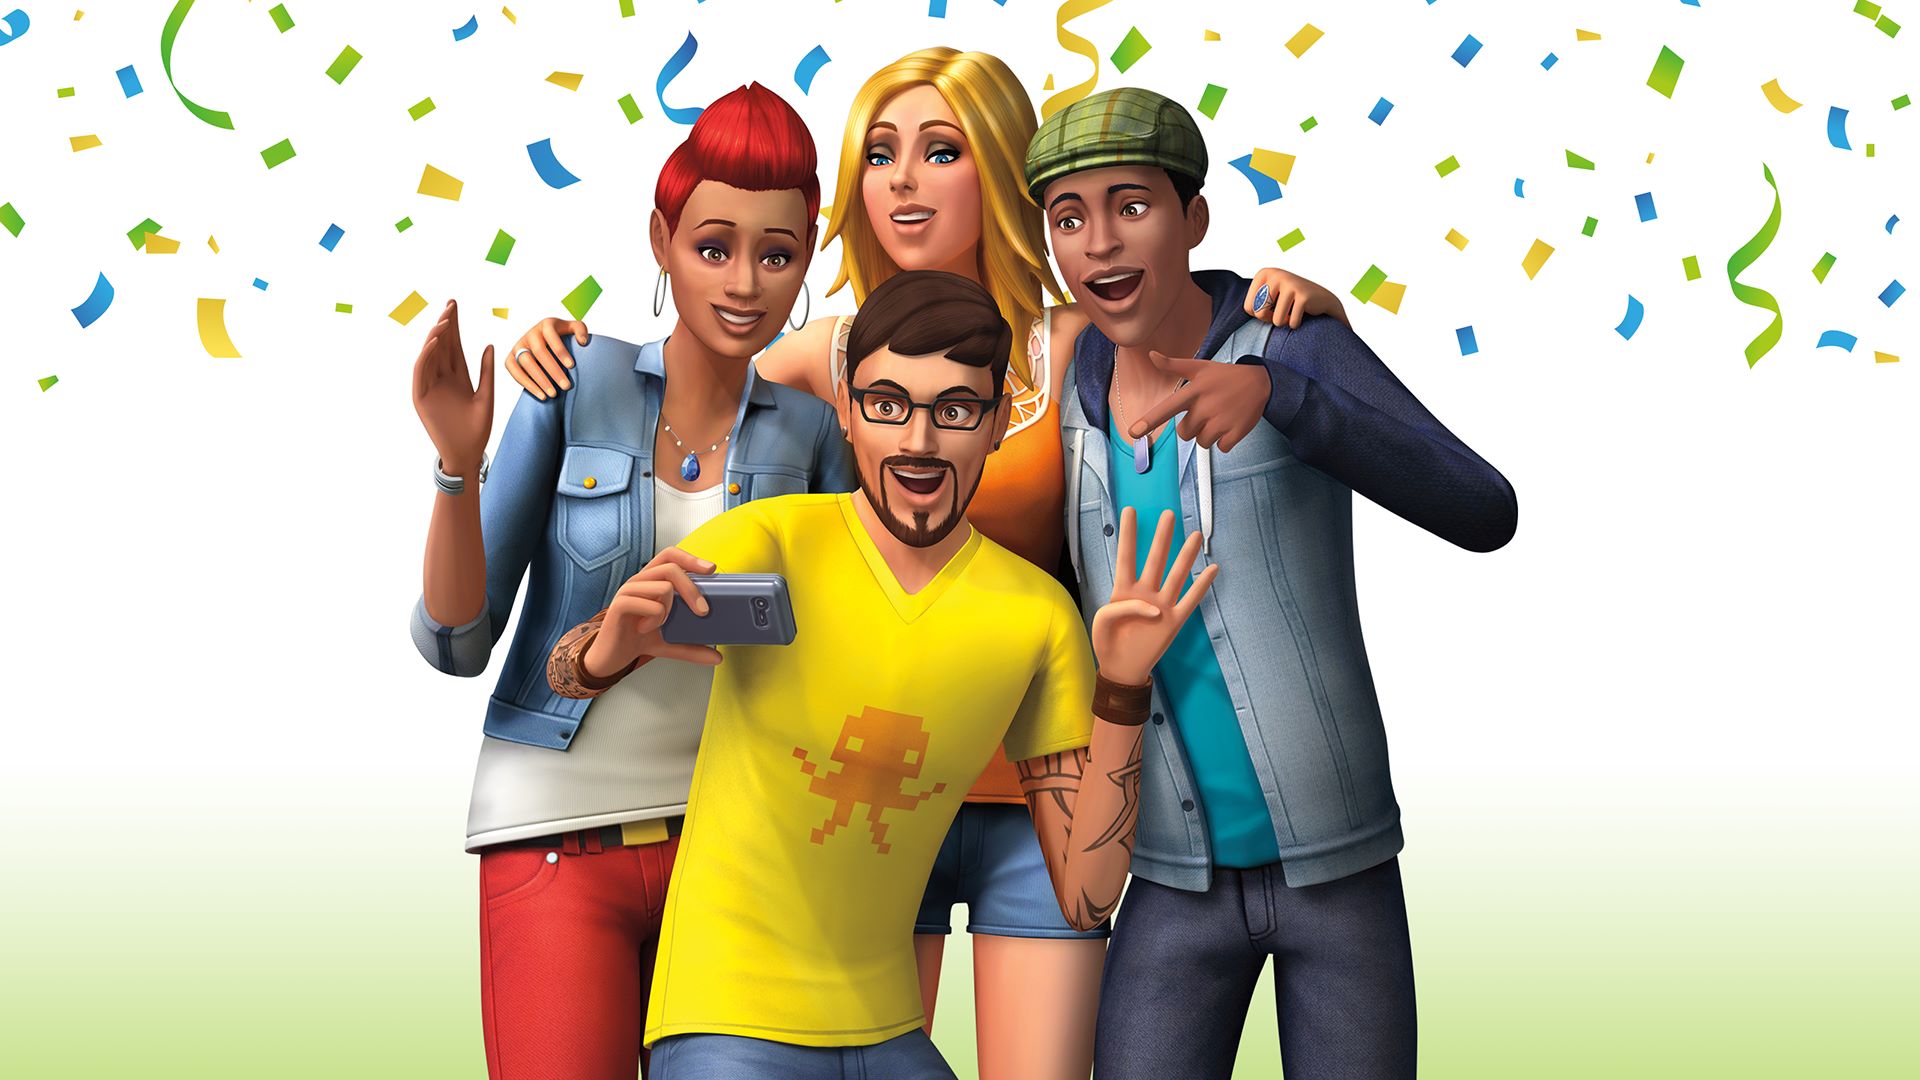 The sims 4 steam price фото 101